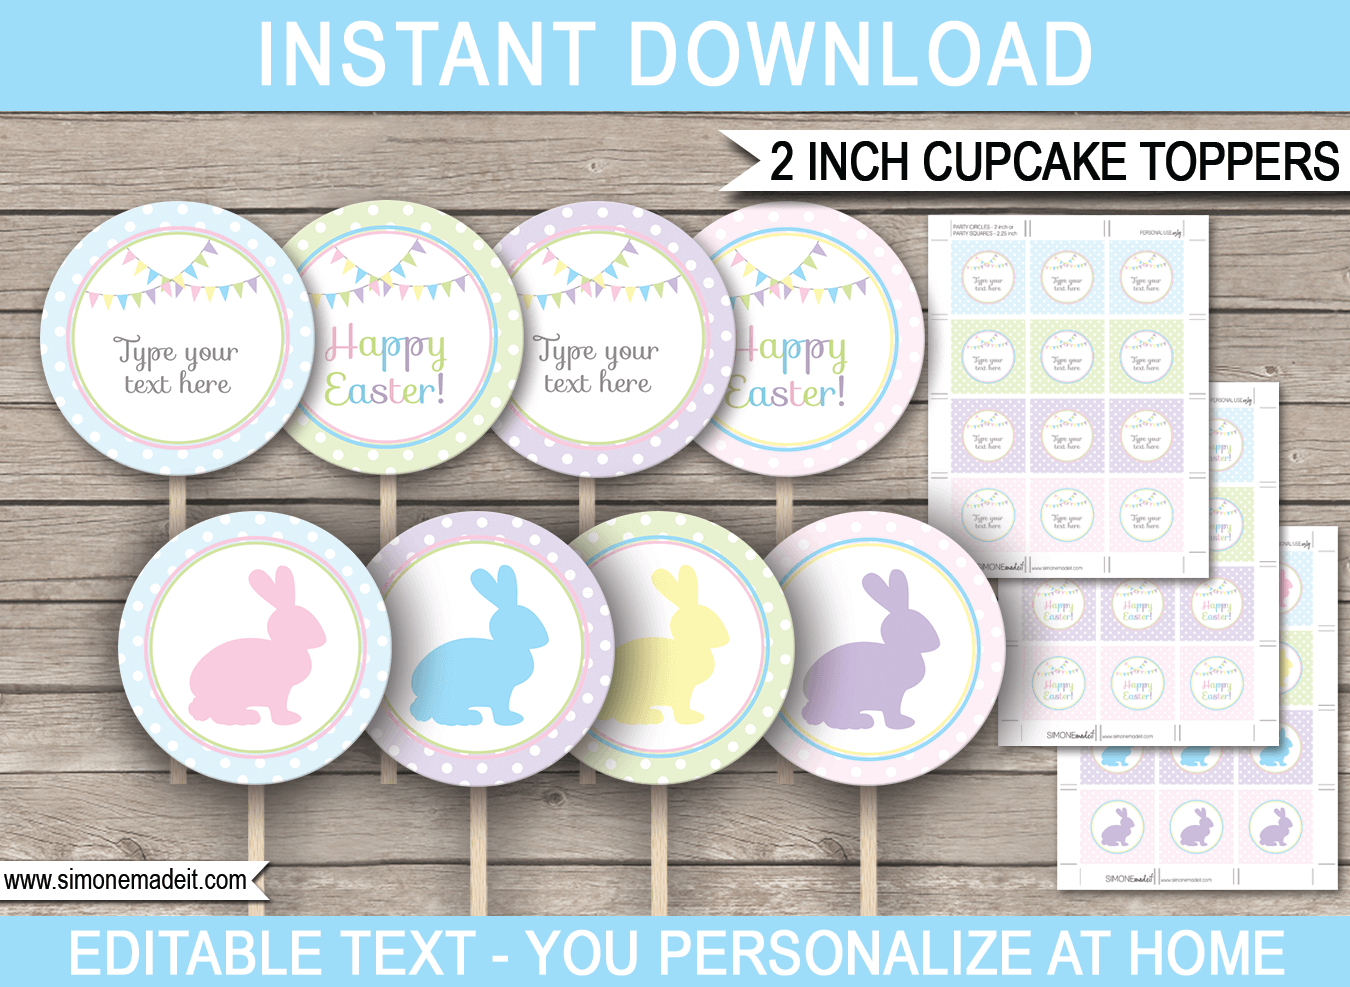 Printable Easter Cupcake Toppers Template | 2 inch | Easter Party | Gift Tags | DIY Editable Text | INSTANT DOWNLOAD via simonemadeit.com